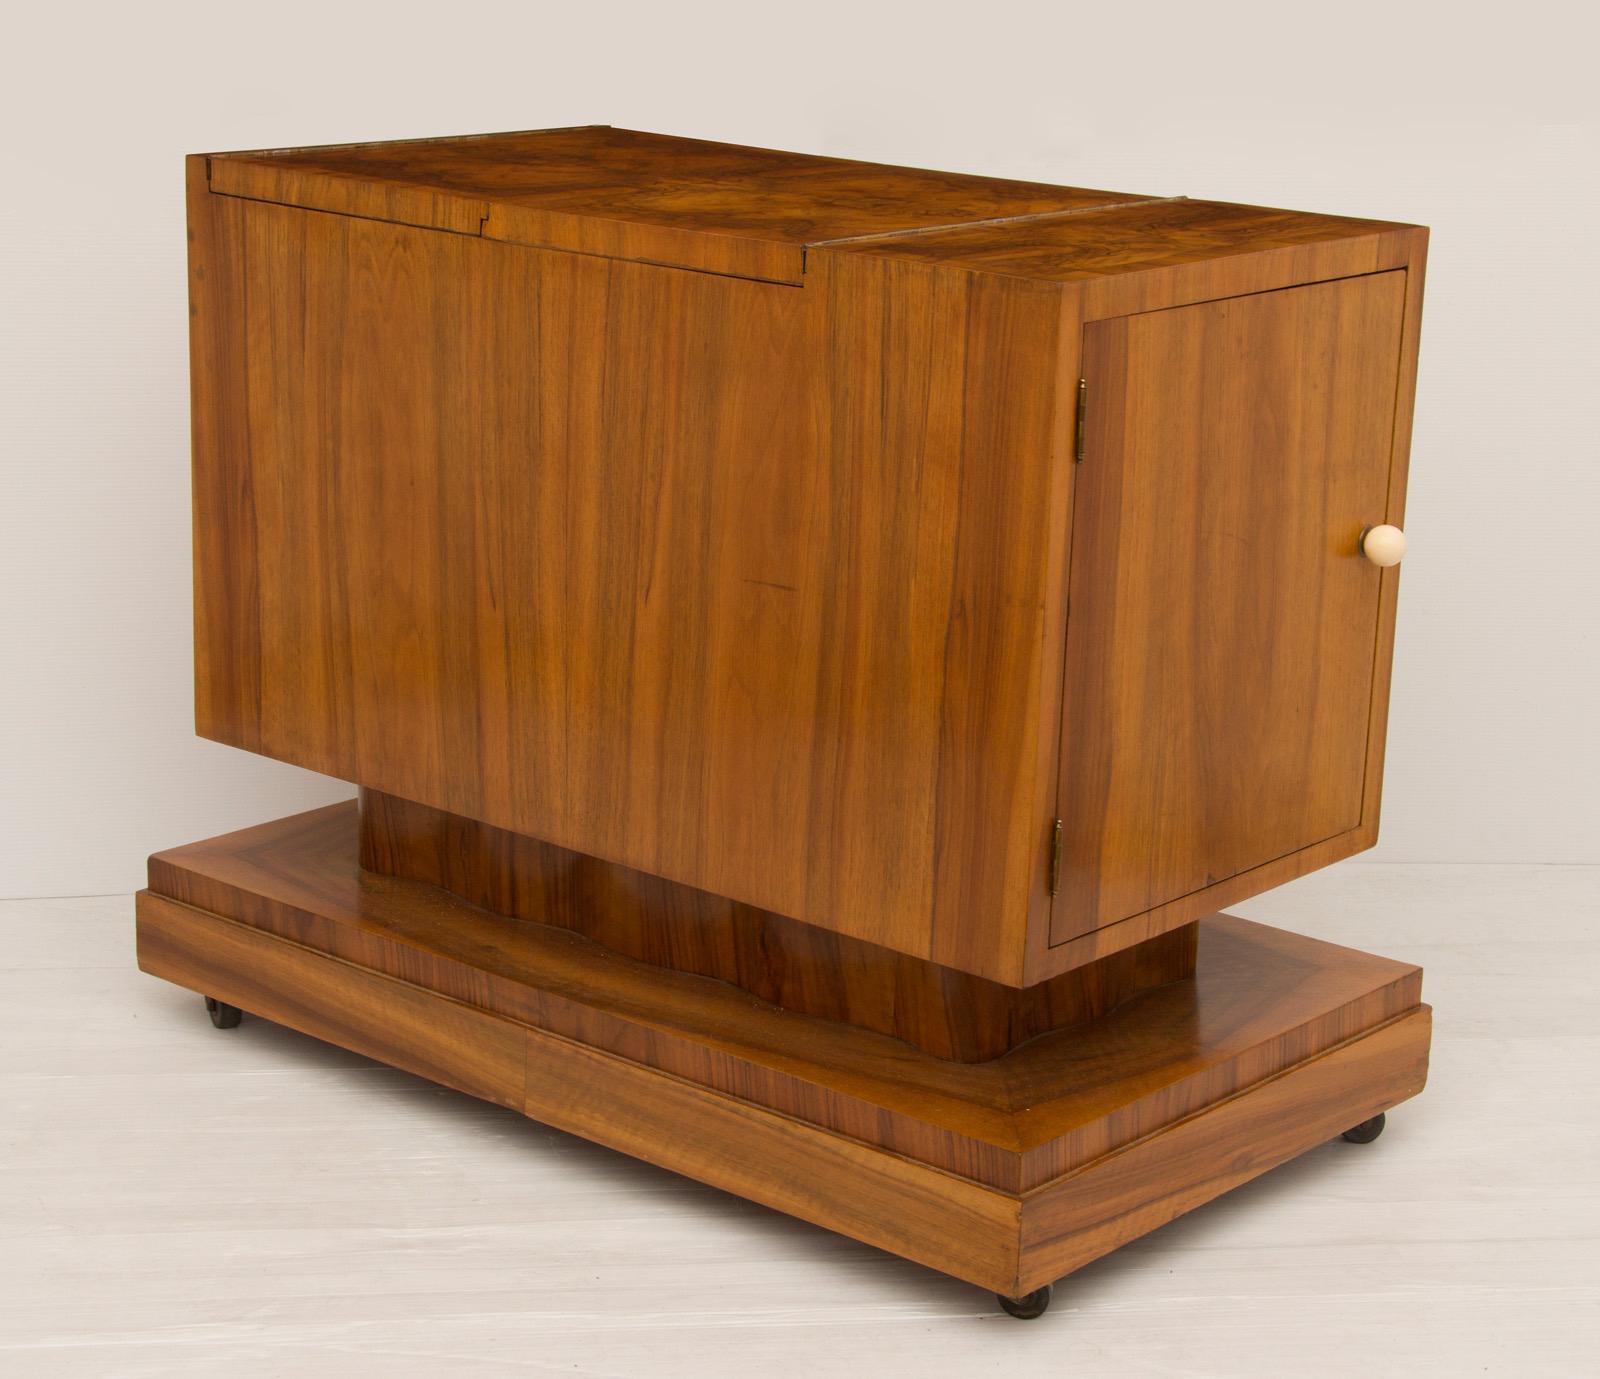 Beautiful Art deco bar cabinet by Hille
Stunning burr walnut bar cart on casters.
Side section has storage for bottles, the top section folds over to reveal the fitted interior and the front panel folds down and has a mirrored top for serving and